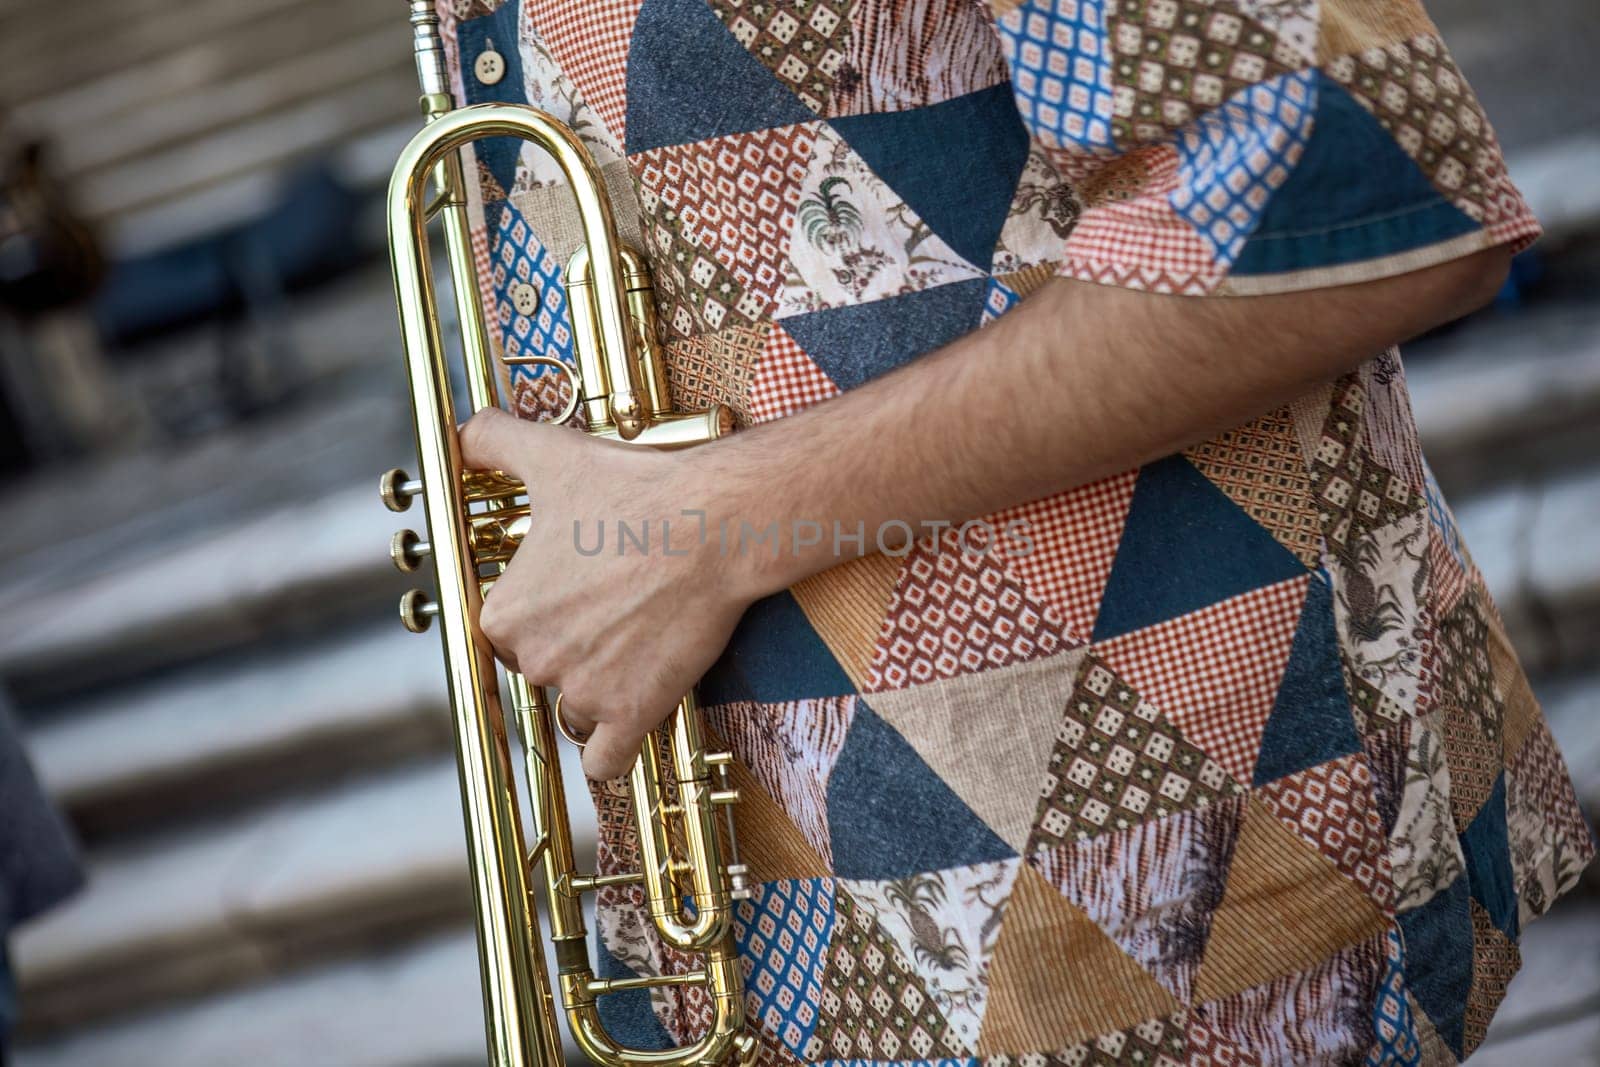 Trumpeter's Hands in Daylight Show by pippocarlot